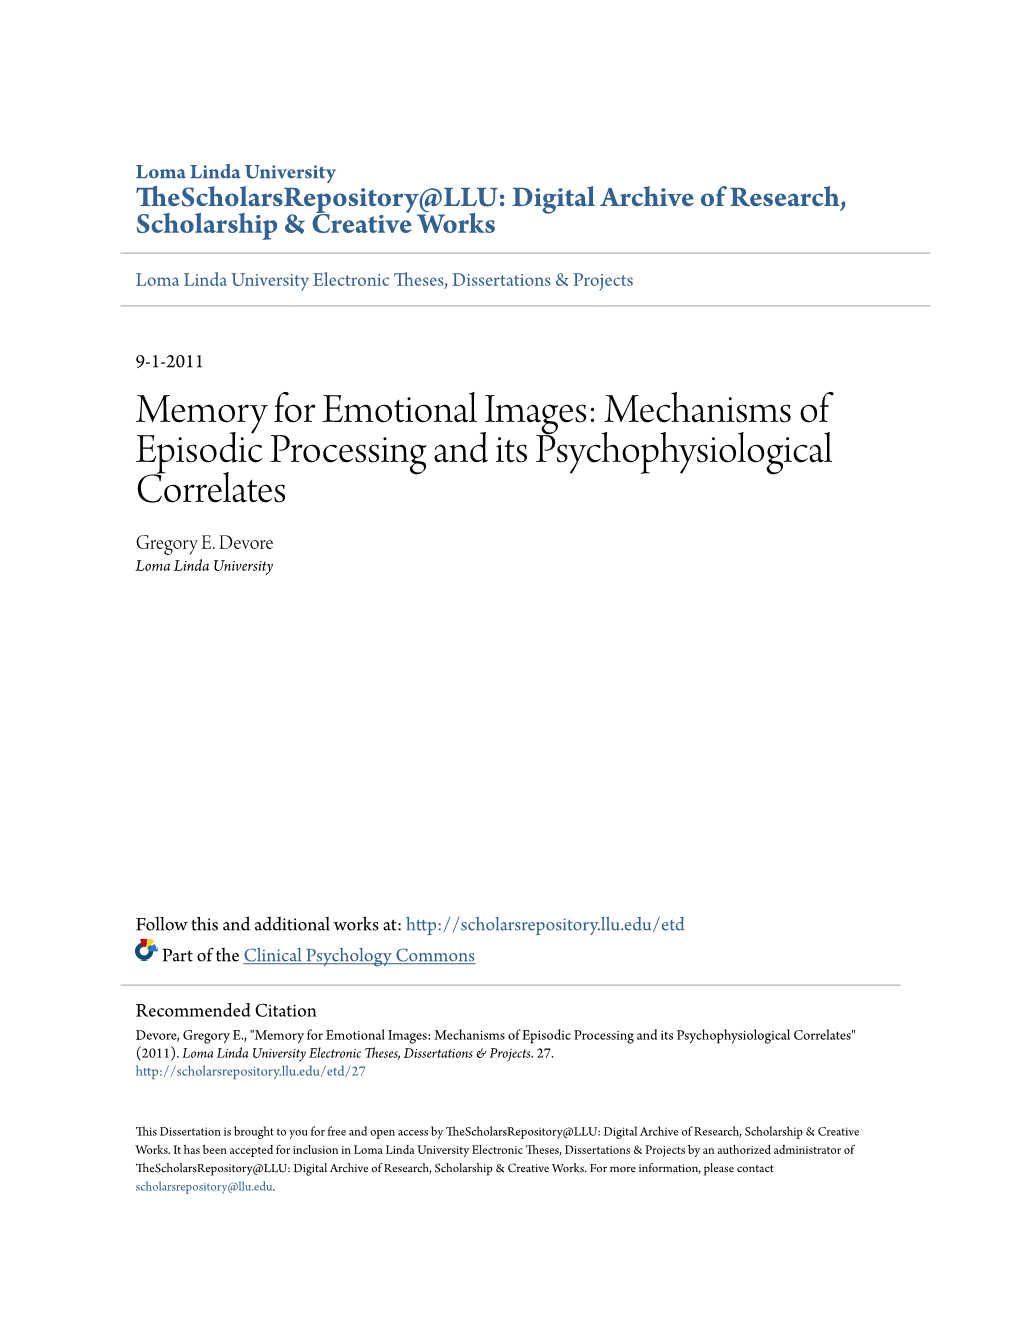 Memory for Emotional Images: Mechanisms of Episodic Processing and Its Psychophysiological Correlates Gregory E